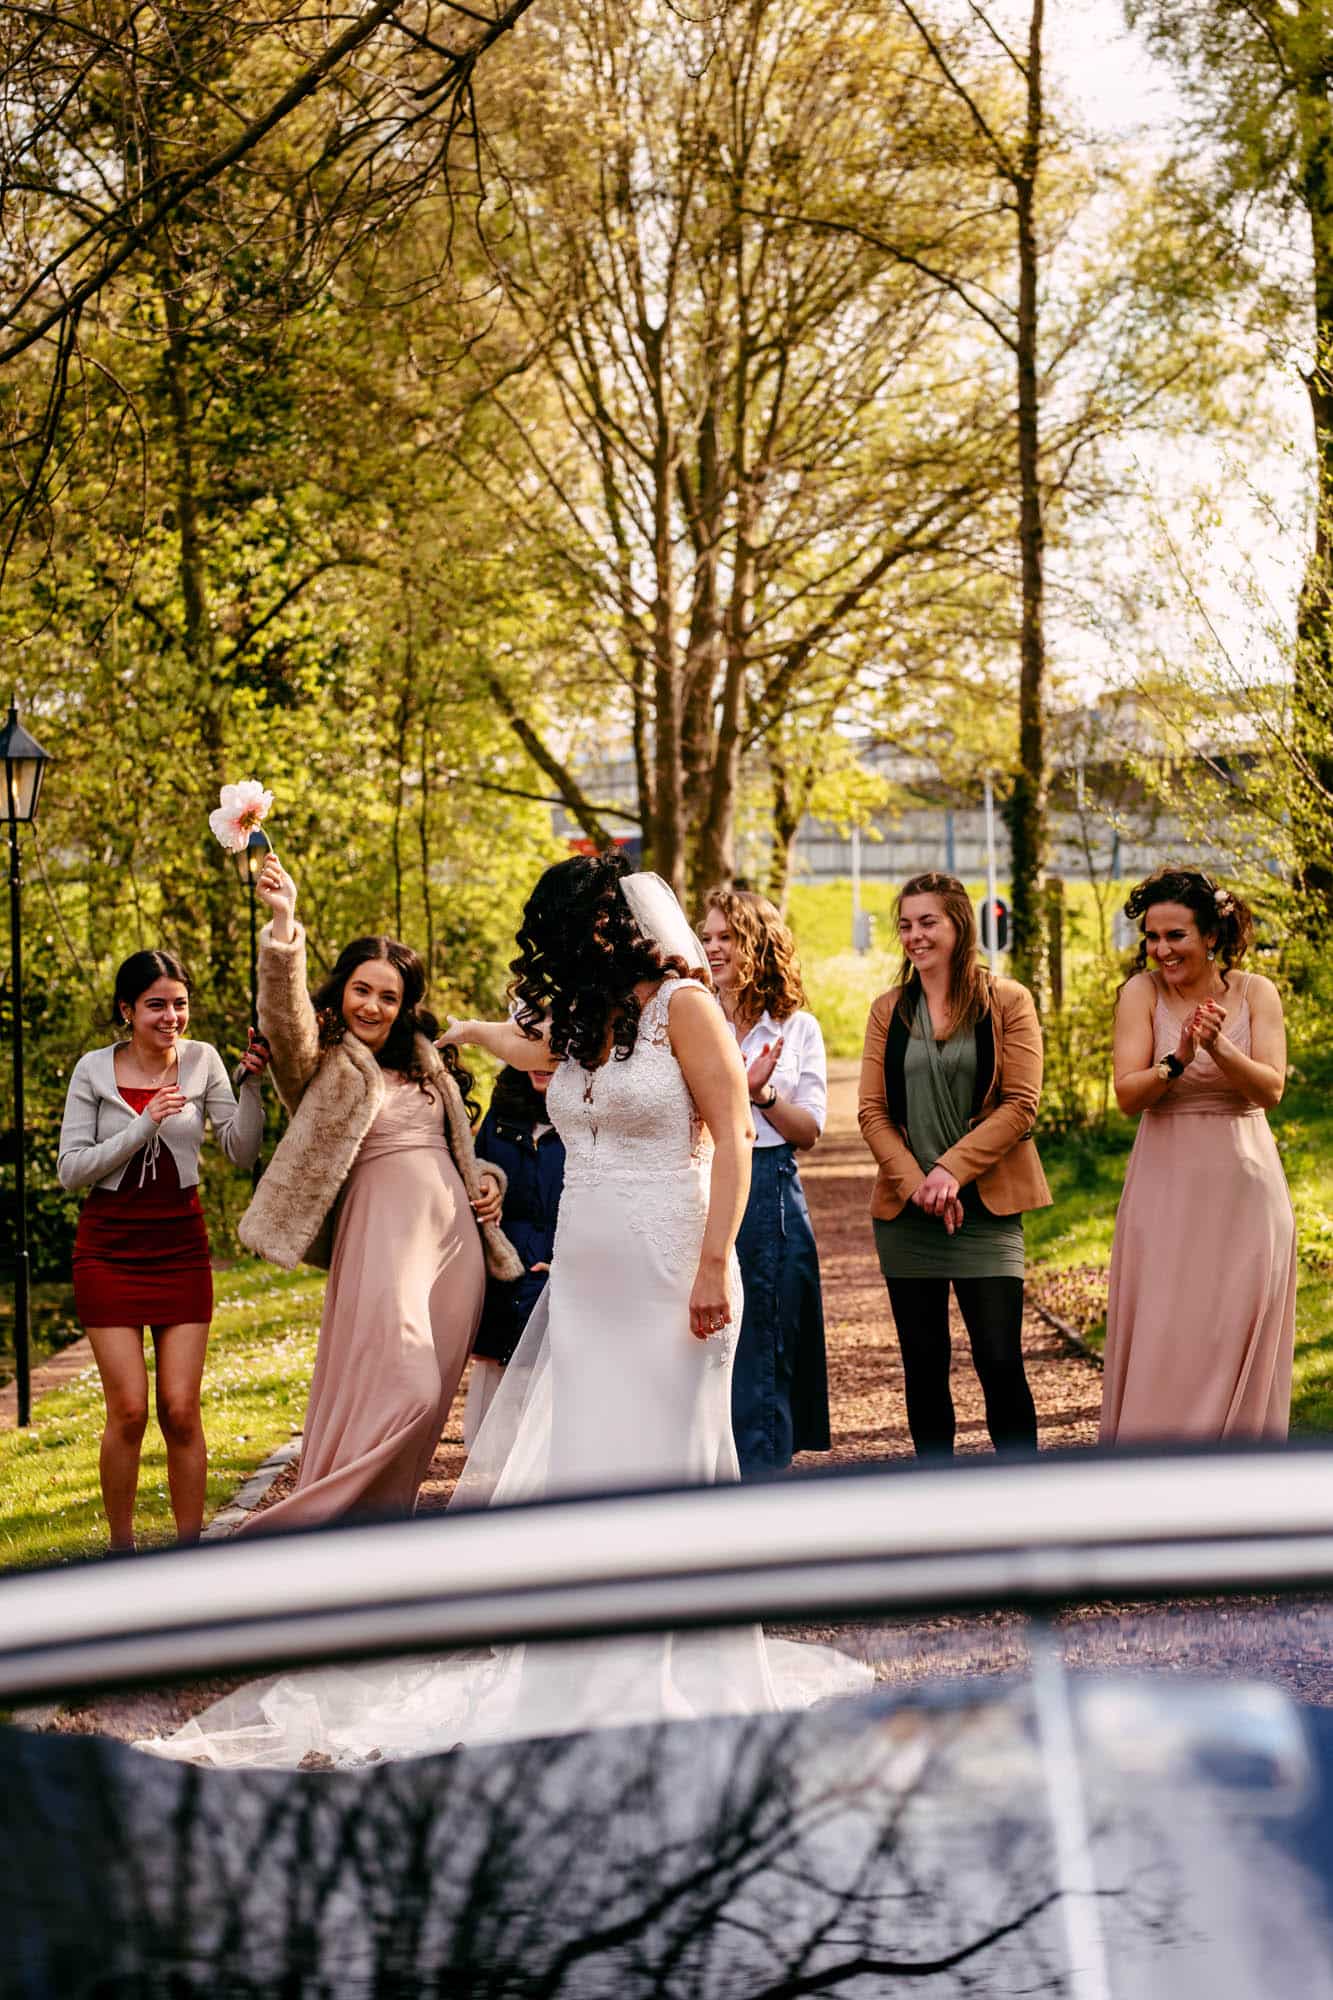 A bride and her bridesmaids get out of a car.